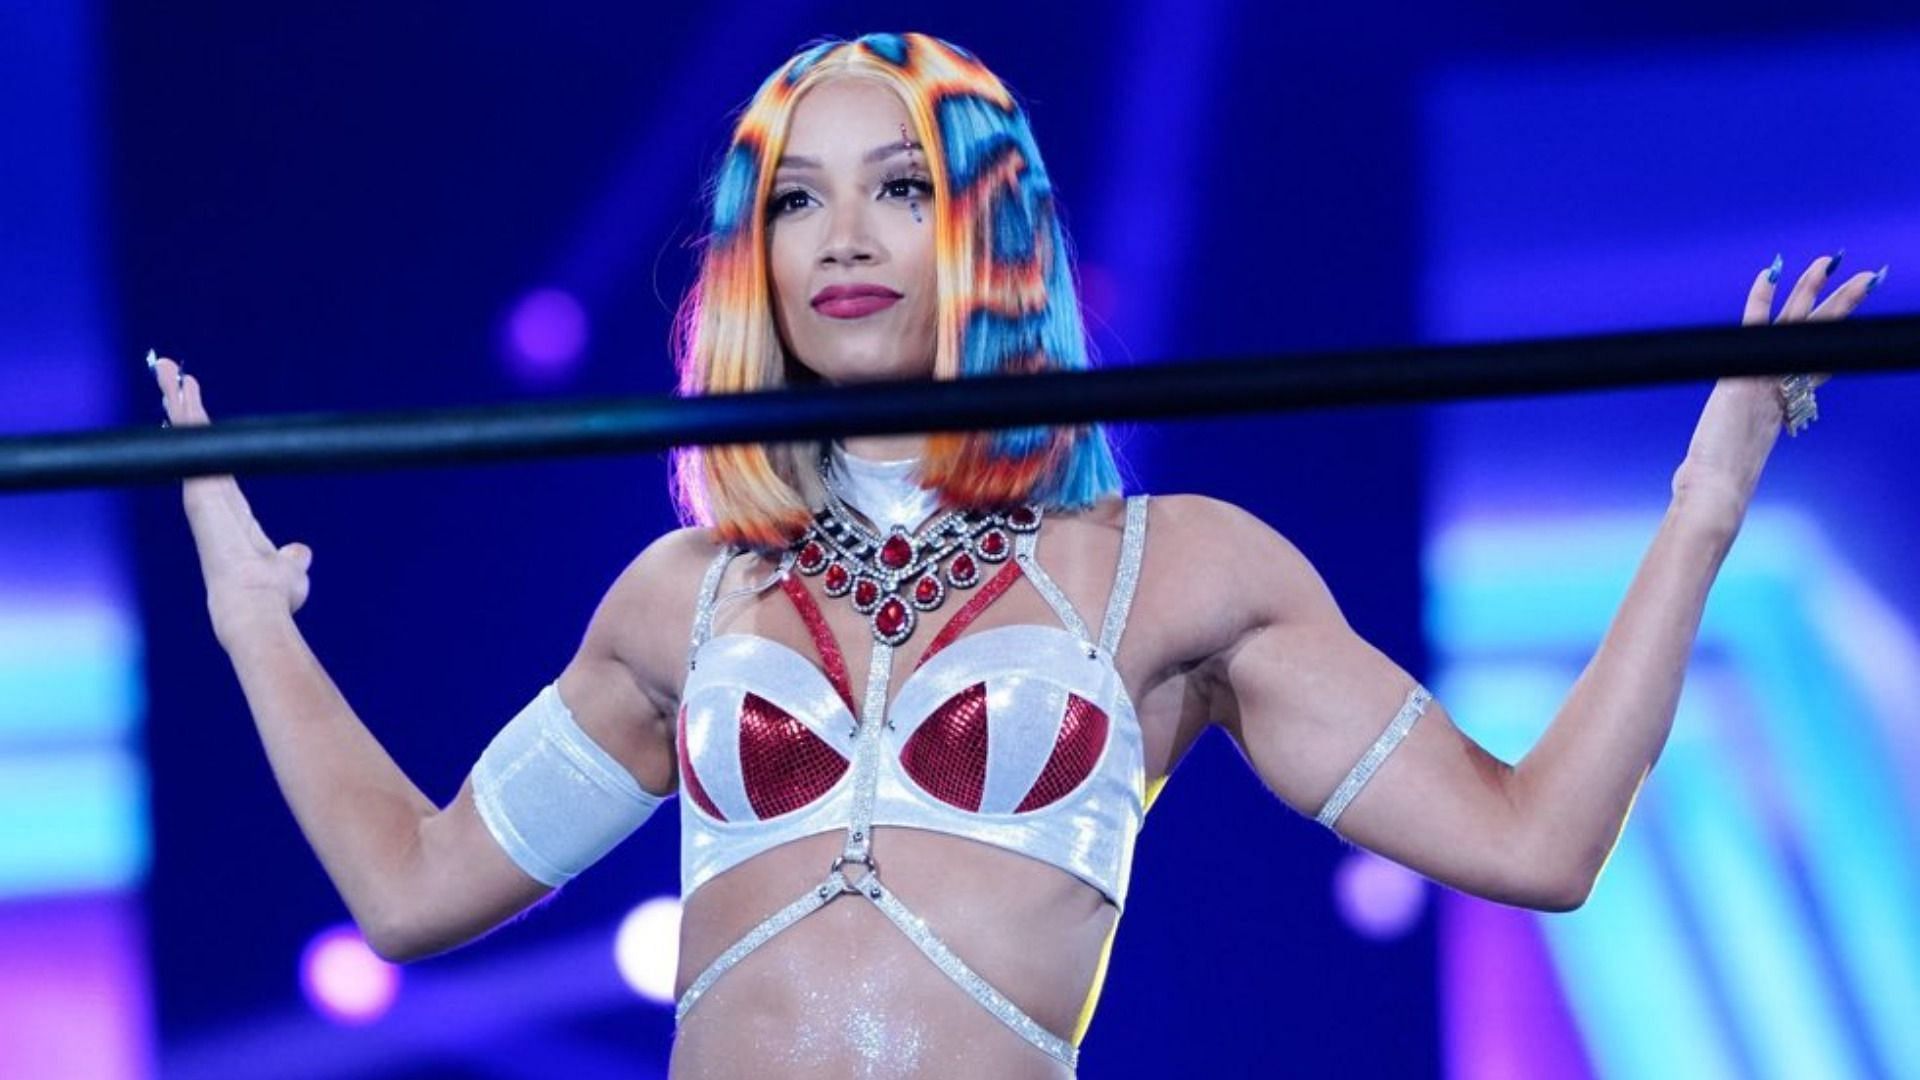 Sasha Banks will now go by the ring name Mercedes Mone.